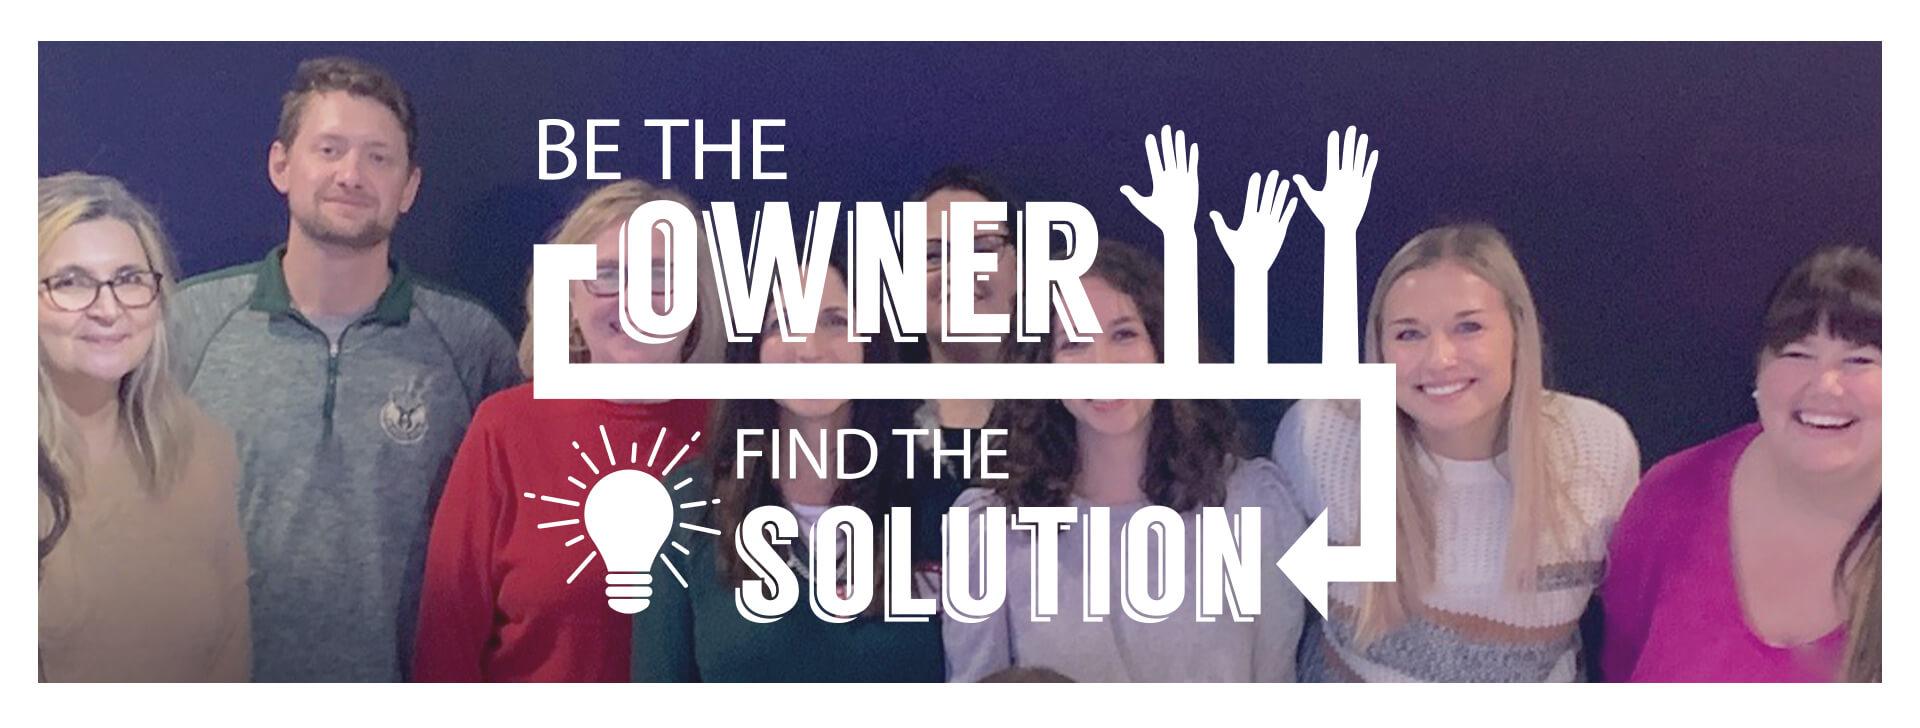 Be the Owner, Find the Solution